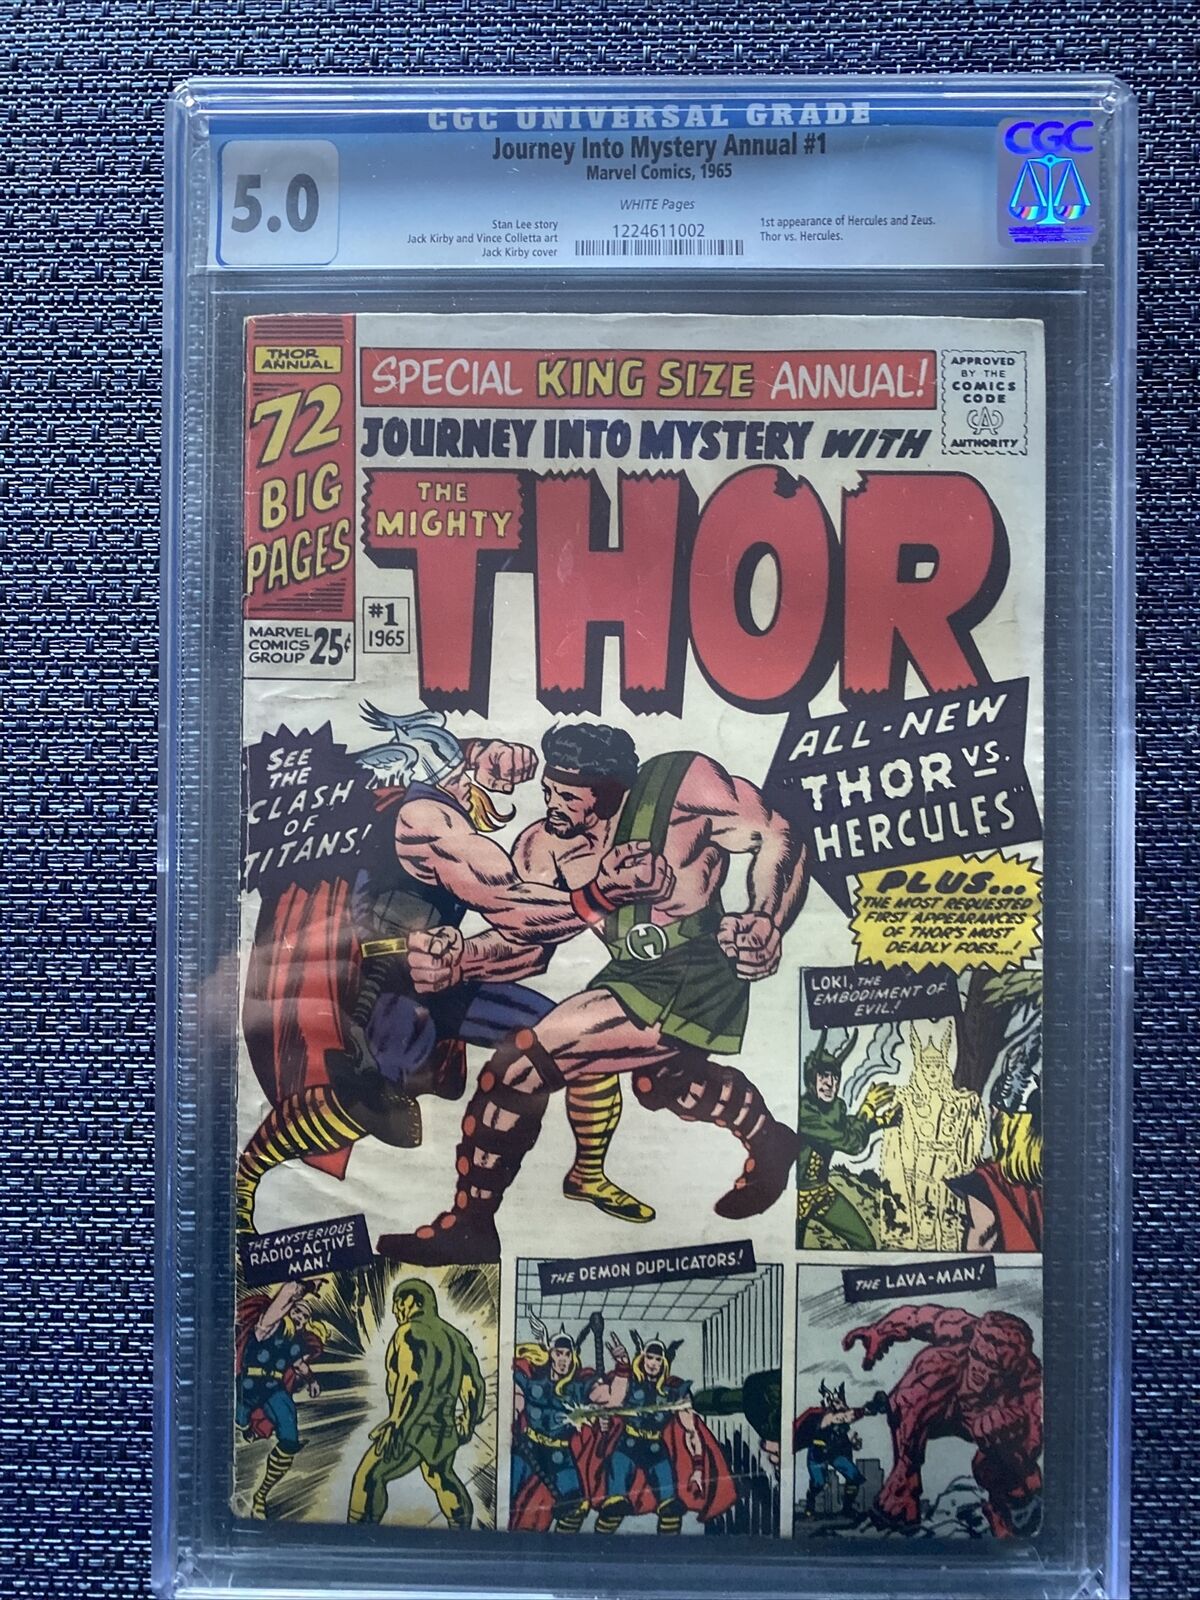 Journey Into Mystery Annual #1 - CGC 5.0 1st Appearance of Hercules/Zeus